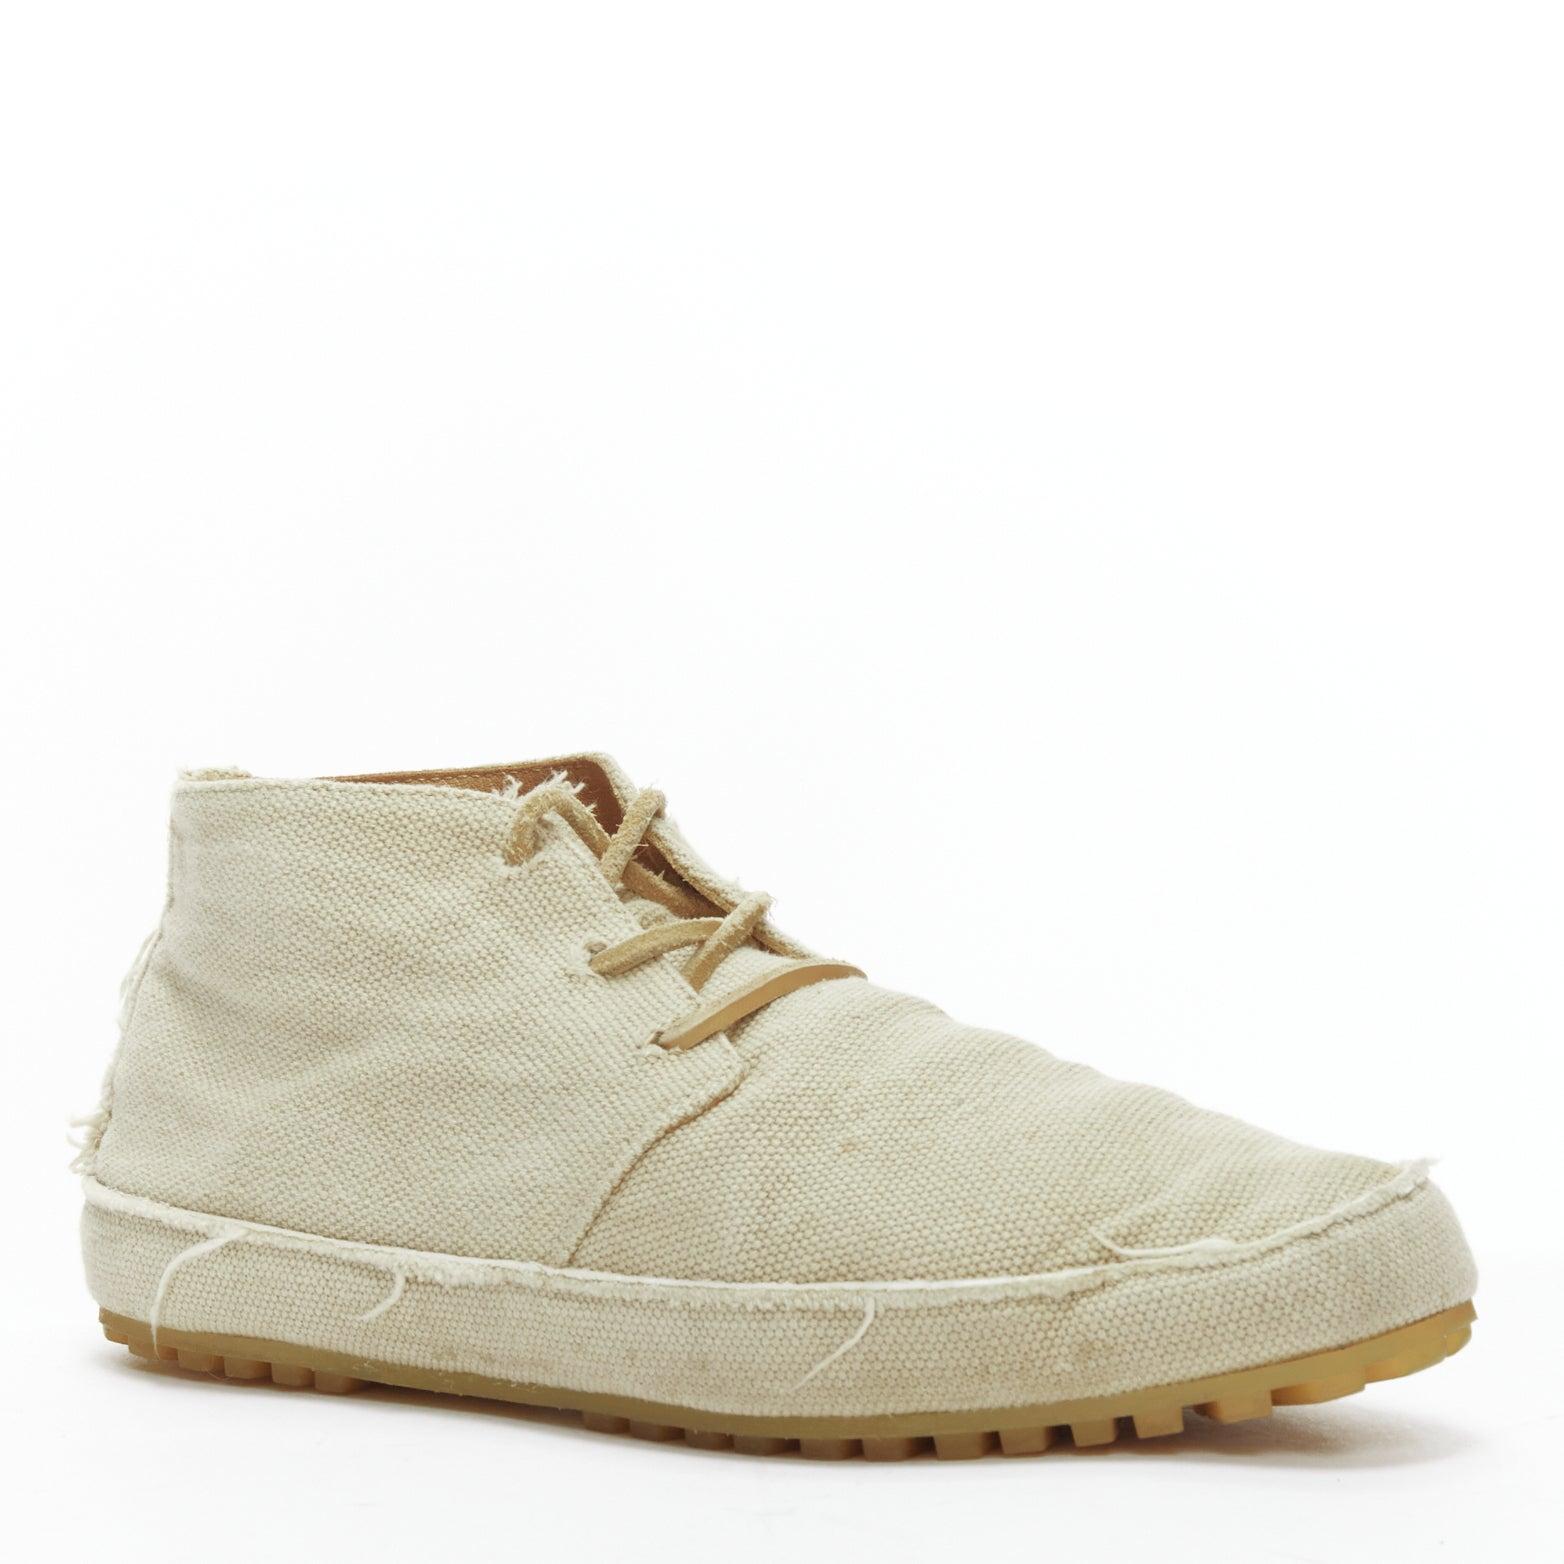 MAISON MARGIELA beige canvas leather lace up espadrille boots EU39
Reference: CNLE/A00231
Brand: Maison Margiela
Designer: Martin Margiela
Material: Canvas
Color: Beige
Pattern: Solid
Closure: Lace Up
Lining: Brown Leather
Extra Details: Fray edge